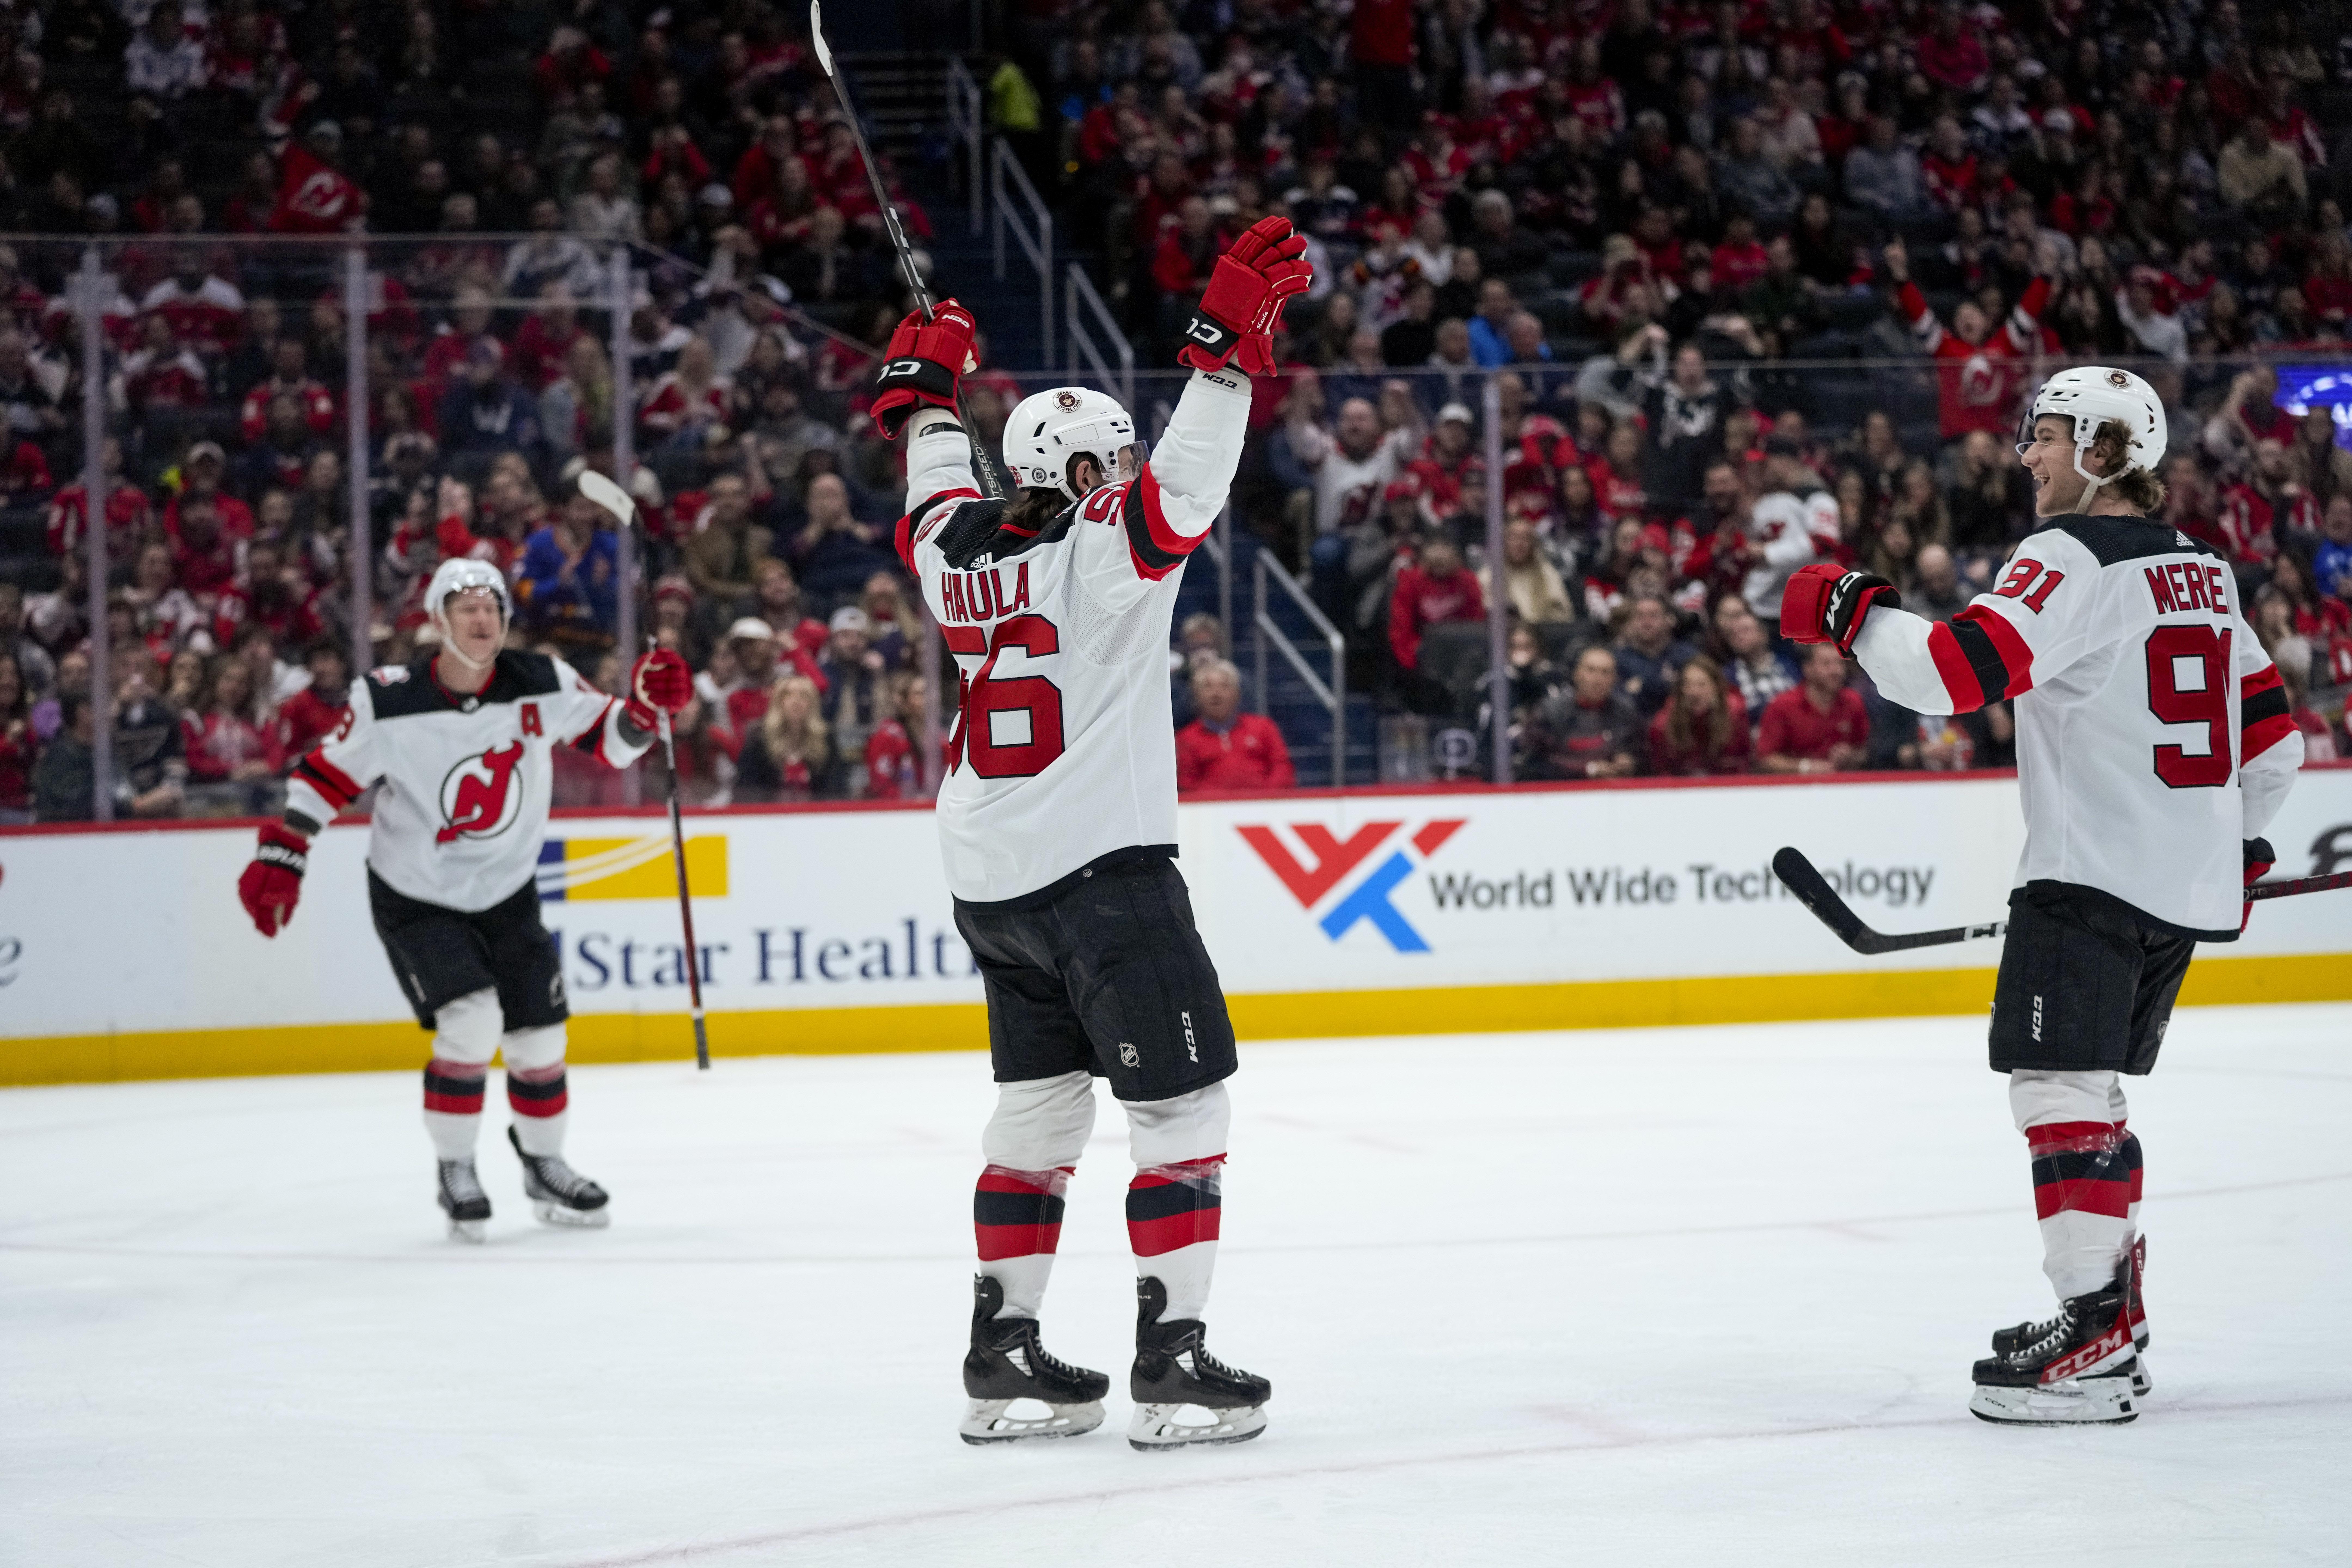 new jersey devils tickets on sale, Off 73%